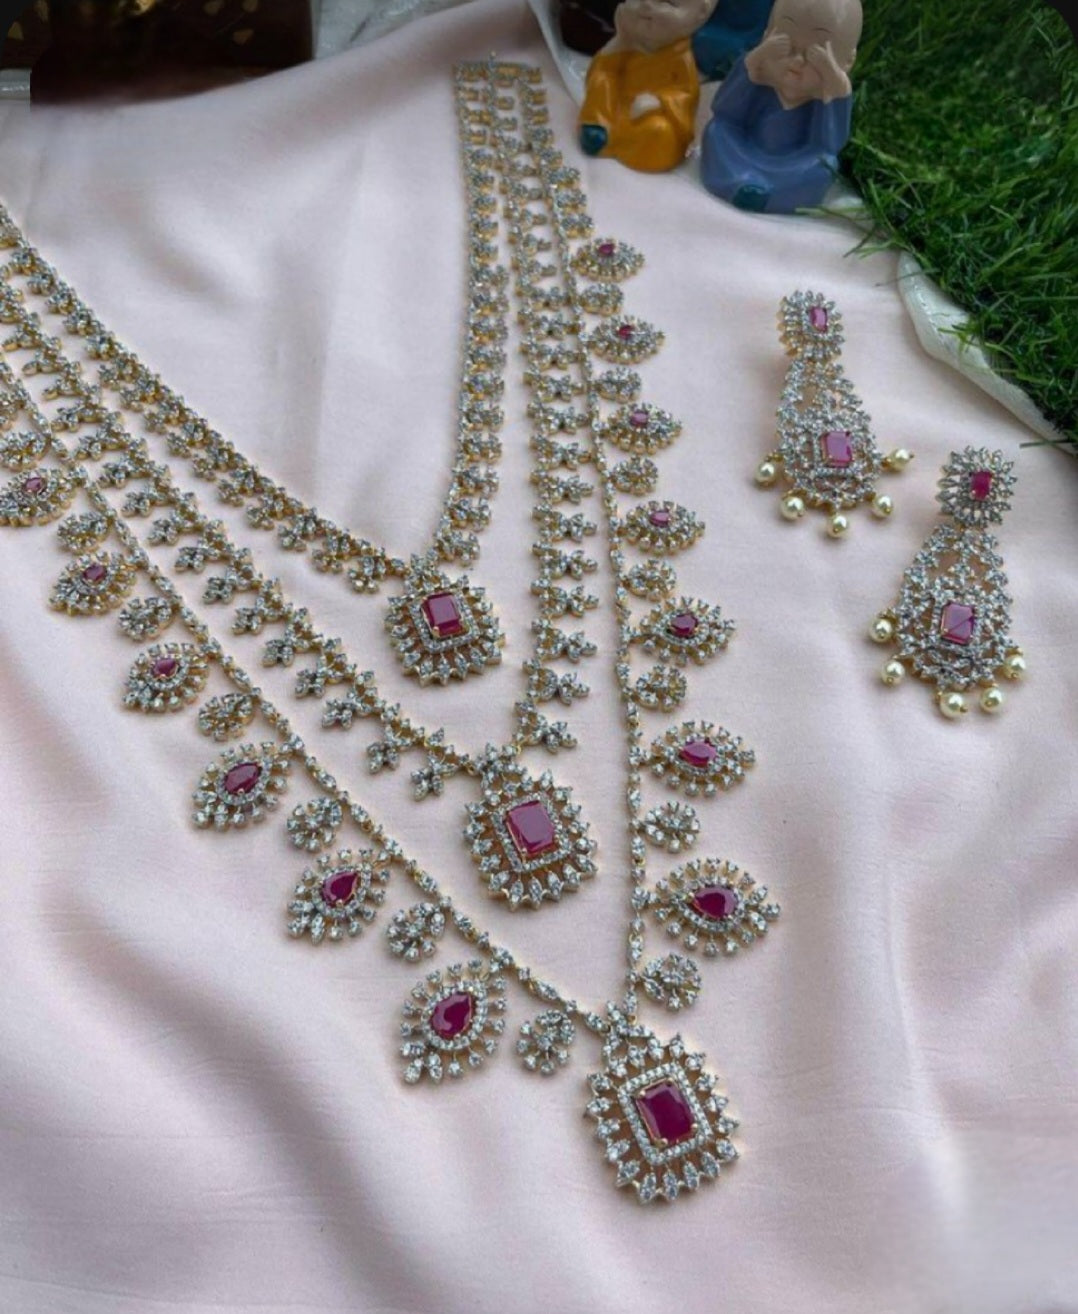 Sagunittu Jewel: Radiant Elegance in Every Layer - Exquisite 3-Layer CZ Haram Necklace Set with Adorned Earrings